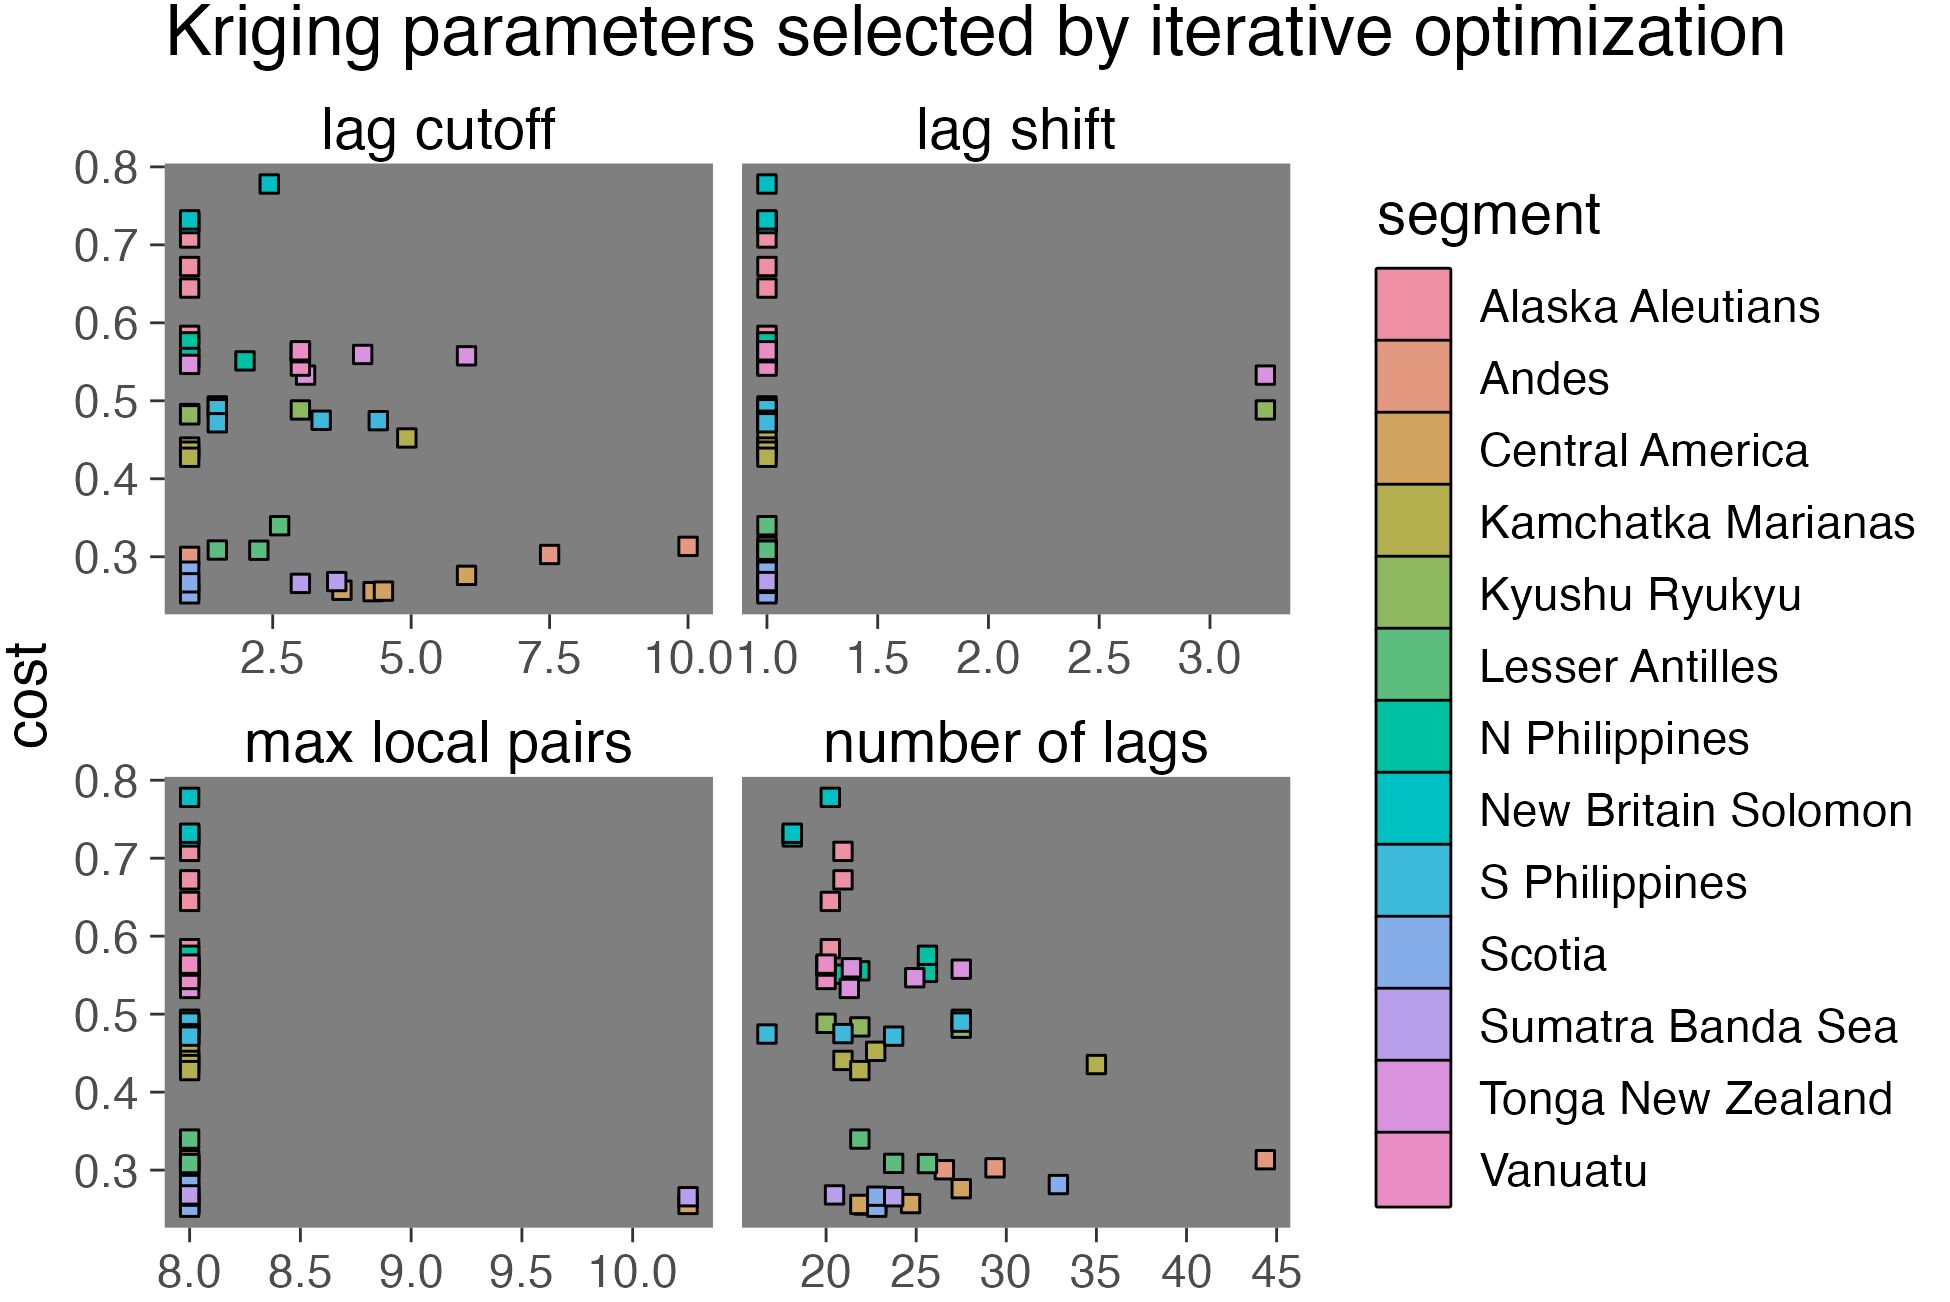 Summary of optimized Kriging parameters. Cost does not correlate strongly with most Kriging parameters (solid black line with ivory 95% confidence intervals), indicating the optimization procedure is successfully generalizable across subduction zone segments. The exception is a correlation between cost and the logarithm of the experimental variogram sill. Note that parameter values adjust from an initial value (solid white line) during the optimization procedure.